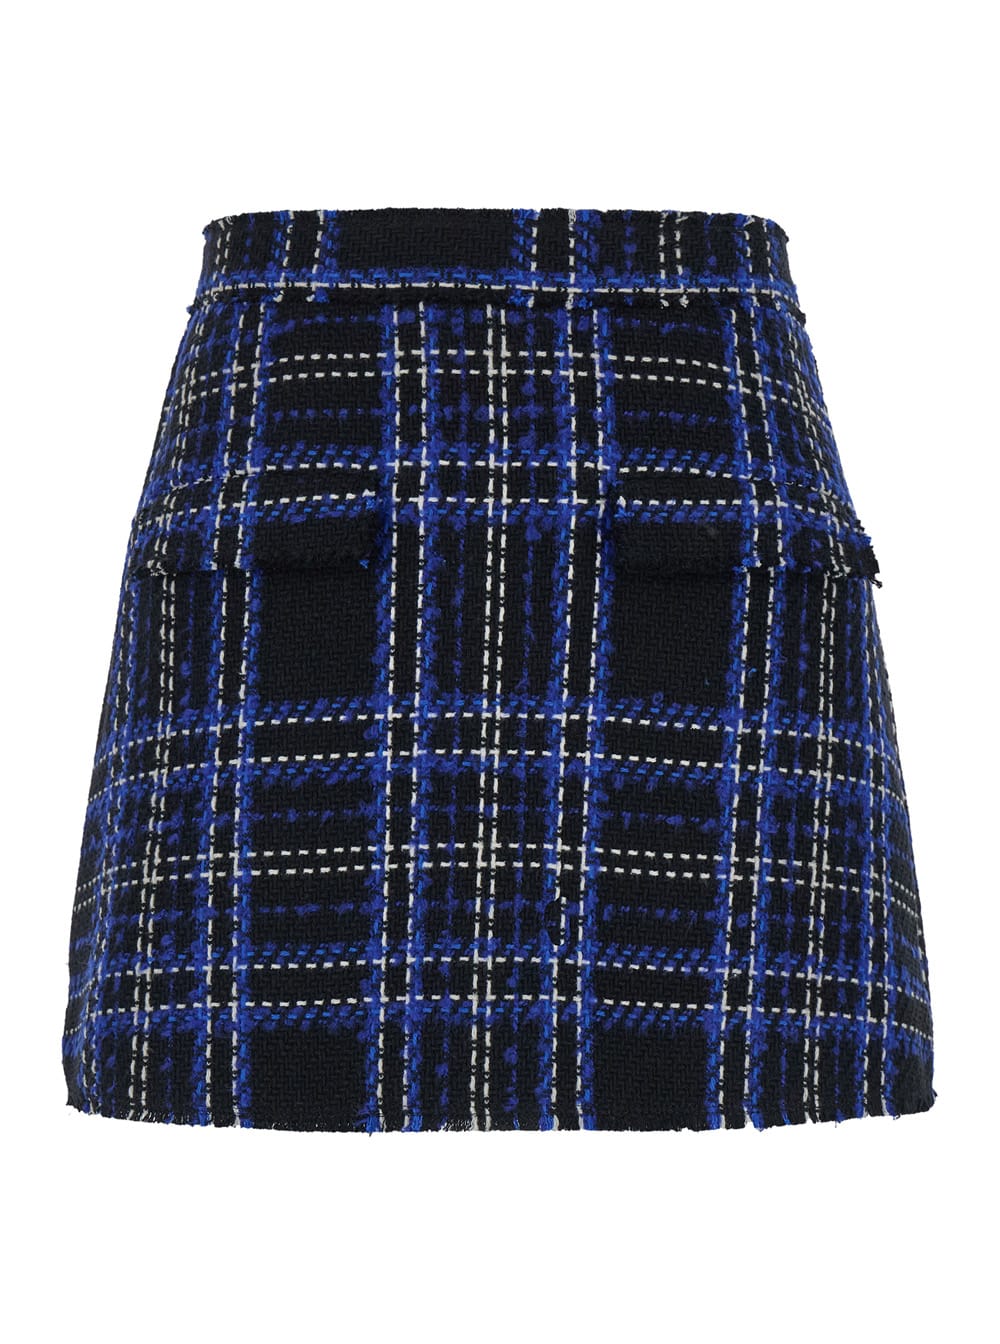 Black And Blue Skorts With Check Motif In Fabric Woman